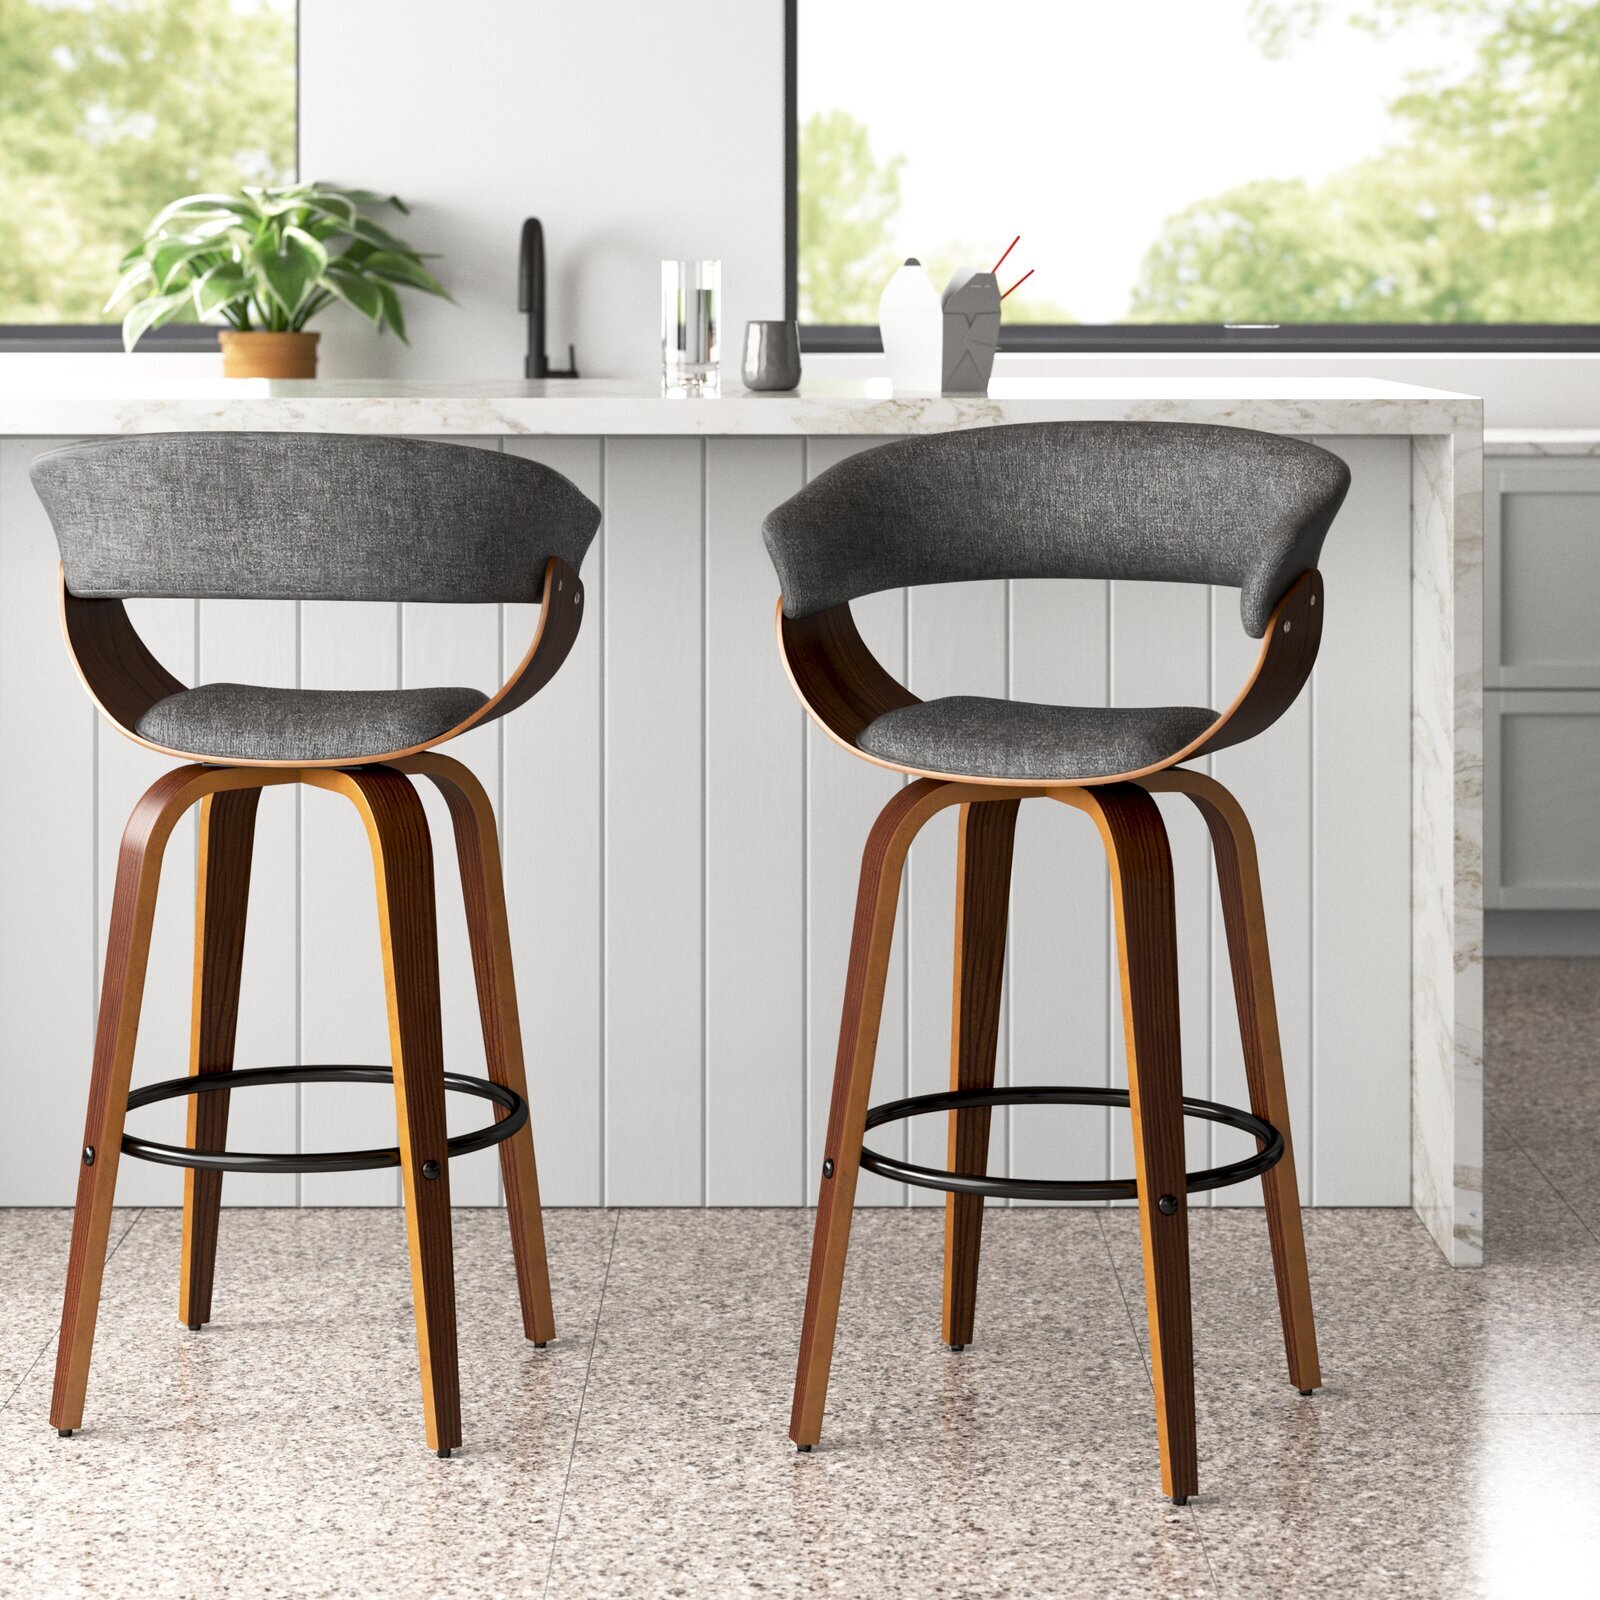 Minimalist padded bar stools with arms